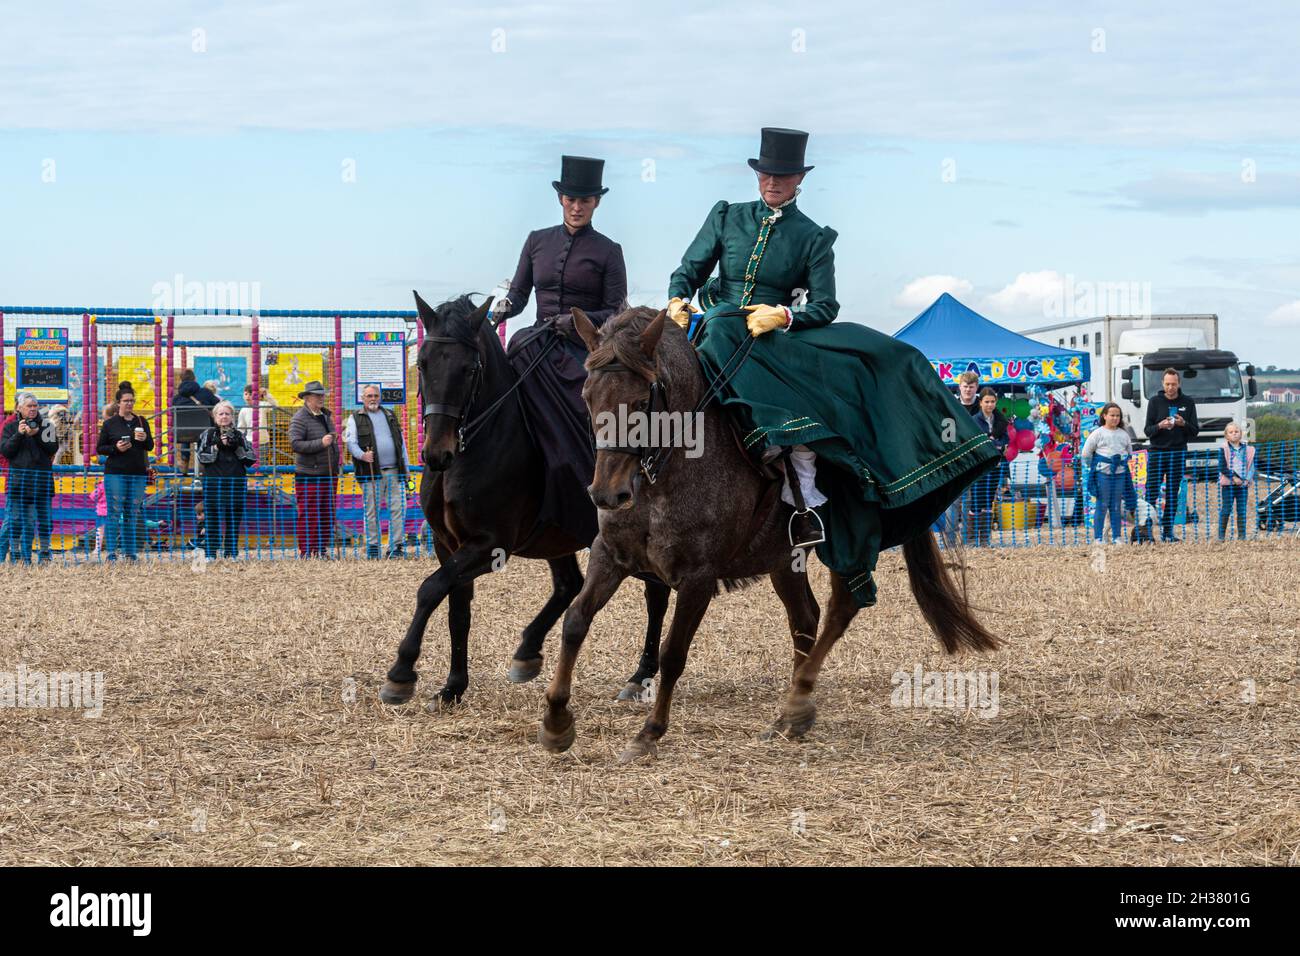 Two women in period costume doing a side-saddle horse-riding display at a horse event, UK Stock Photo